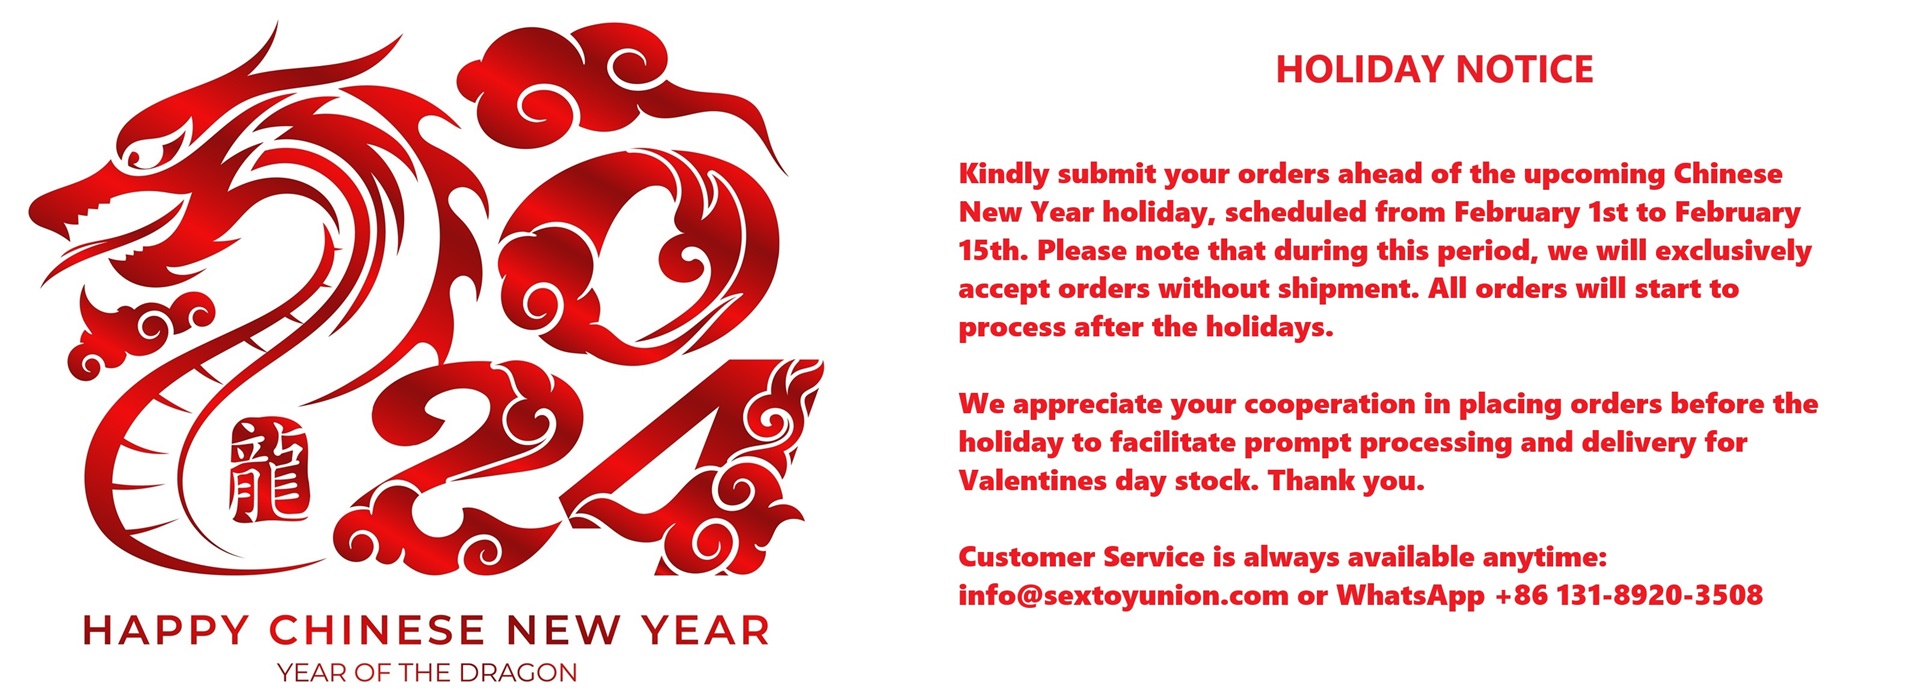 Chinese New Year Shutdown Avoid problems for your business